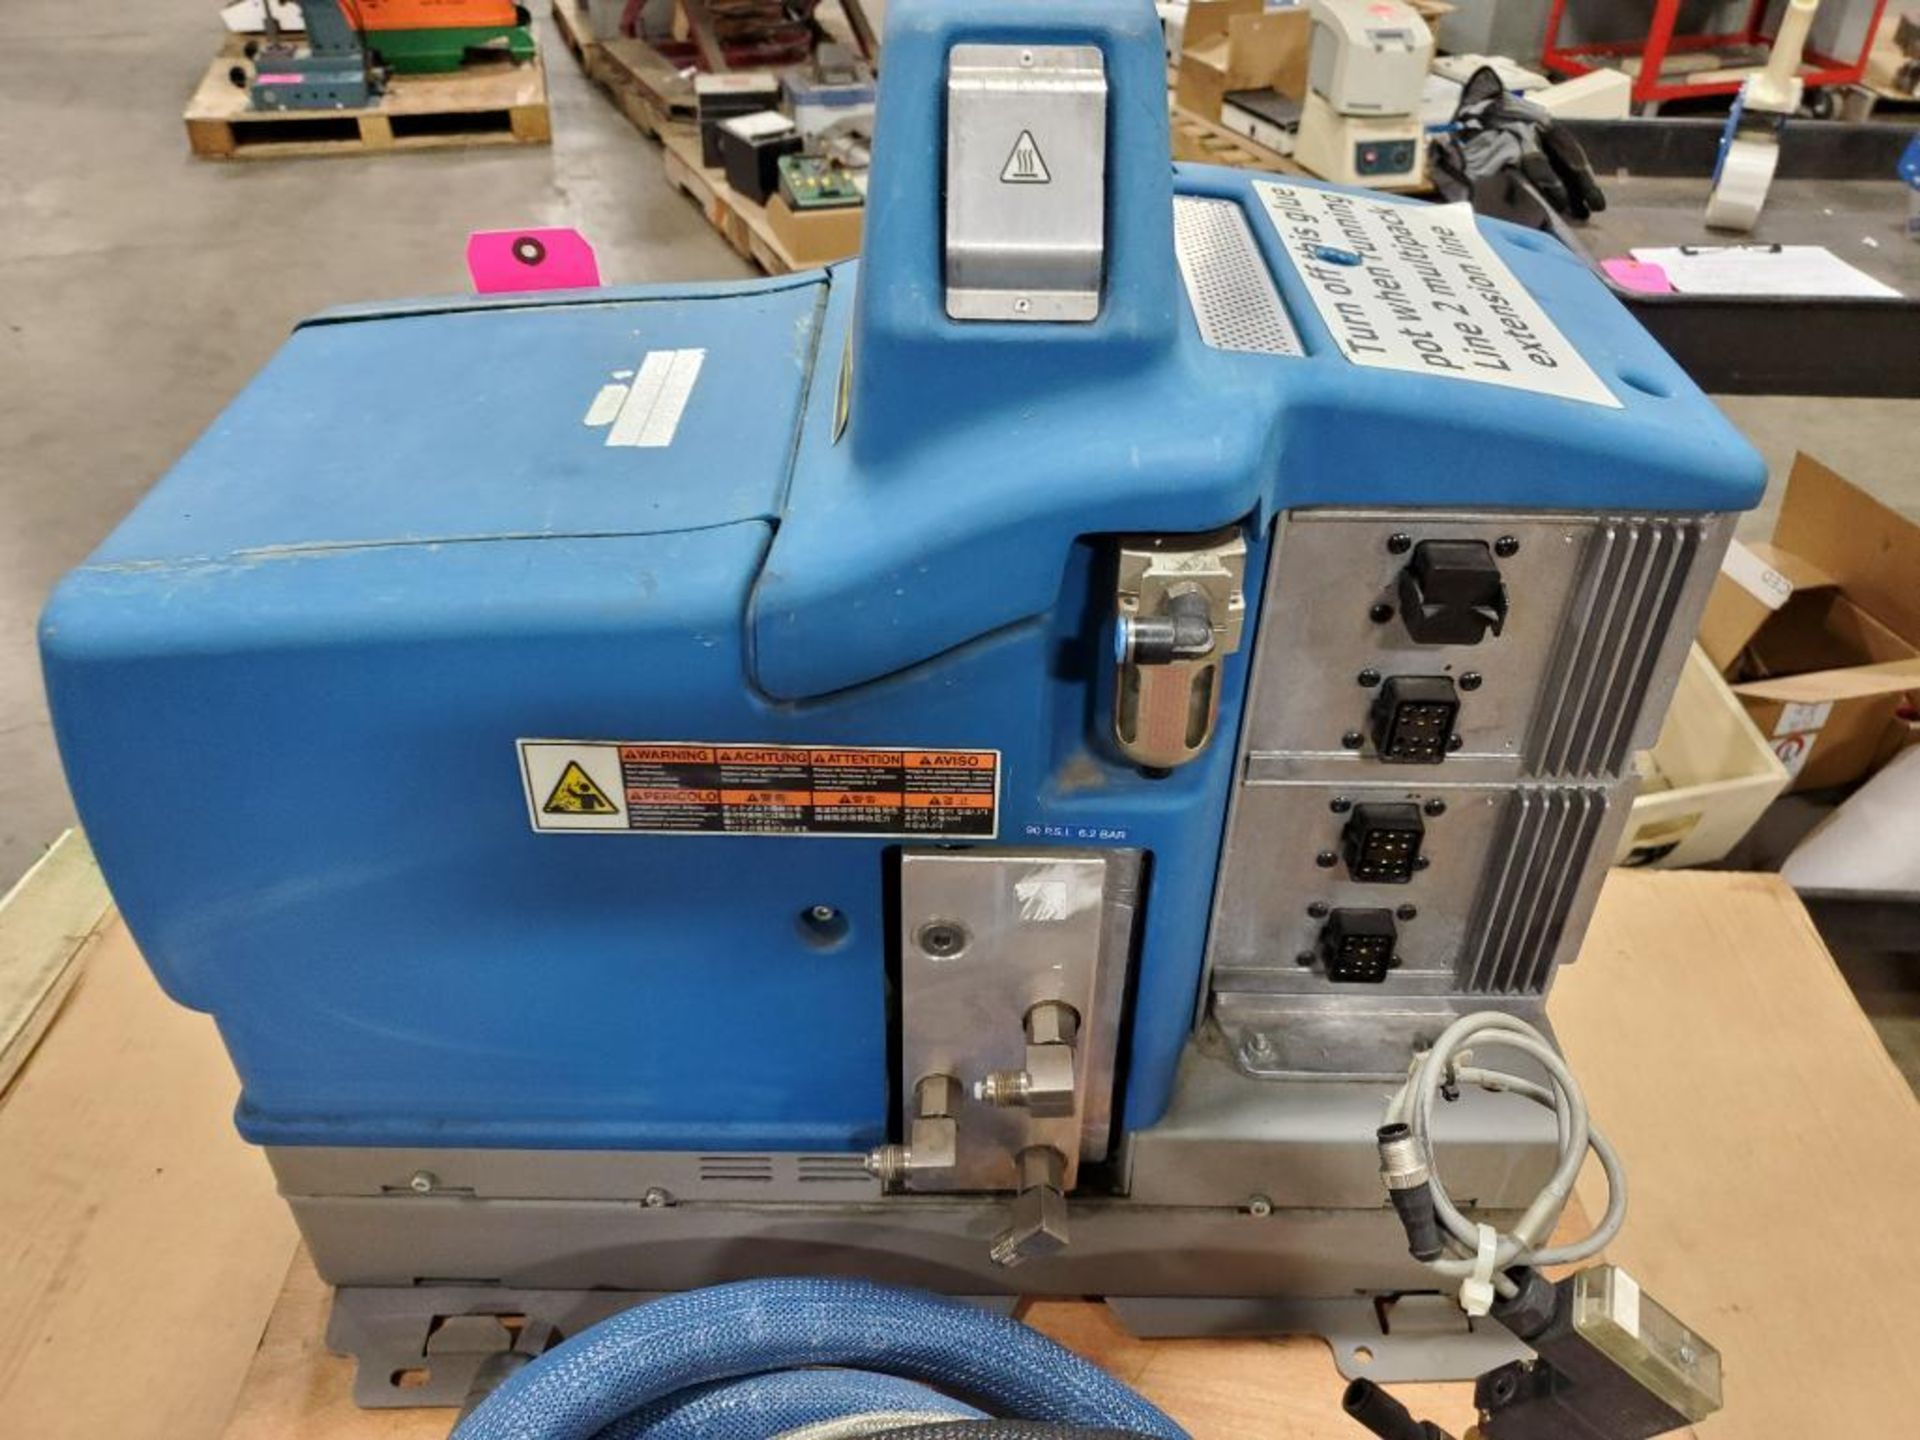 Nordson hot melt adhesive applicating machine. Model PRO Blue 7. Includes 2 hoses and heads. - Image 11 of 14